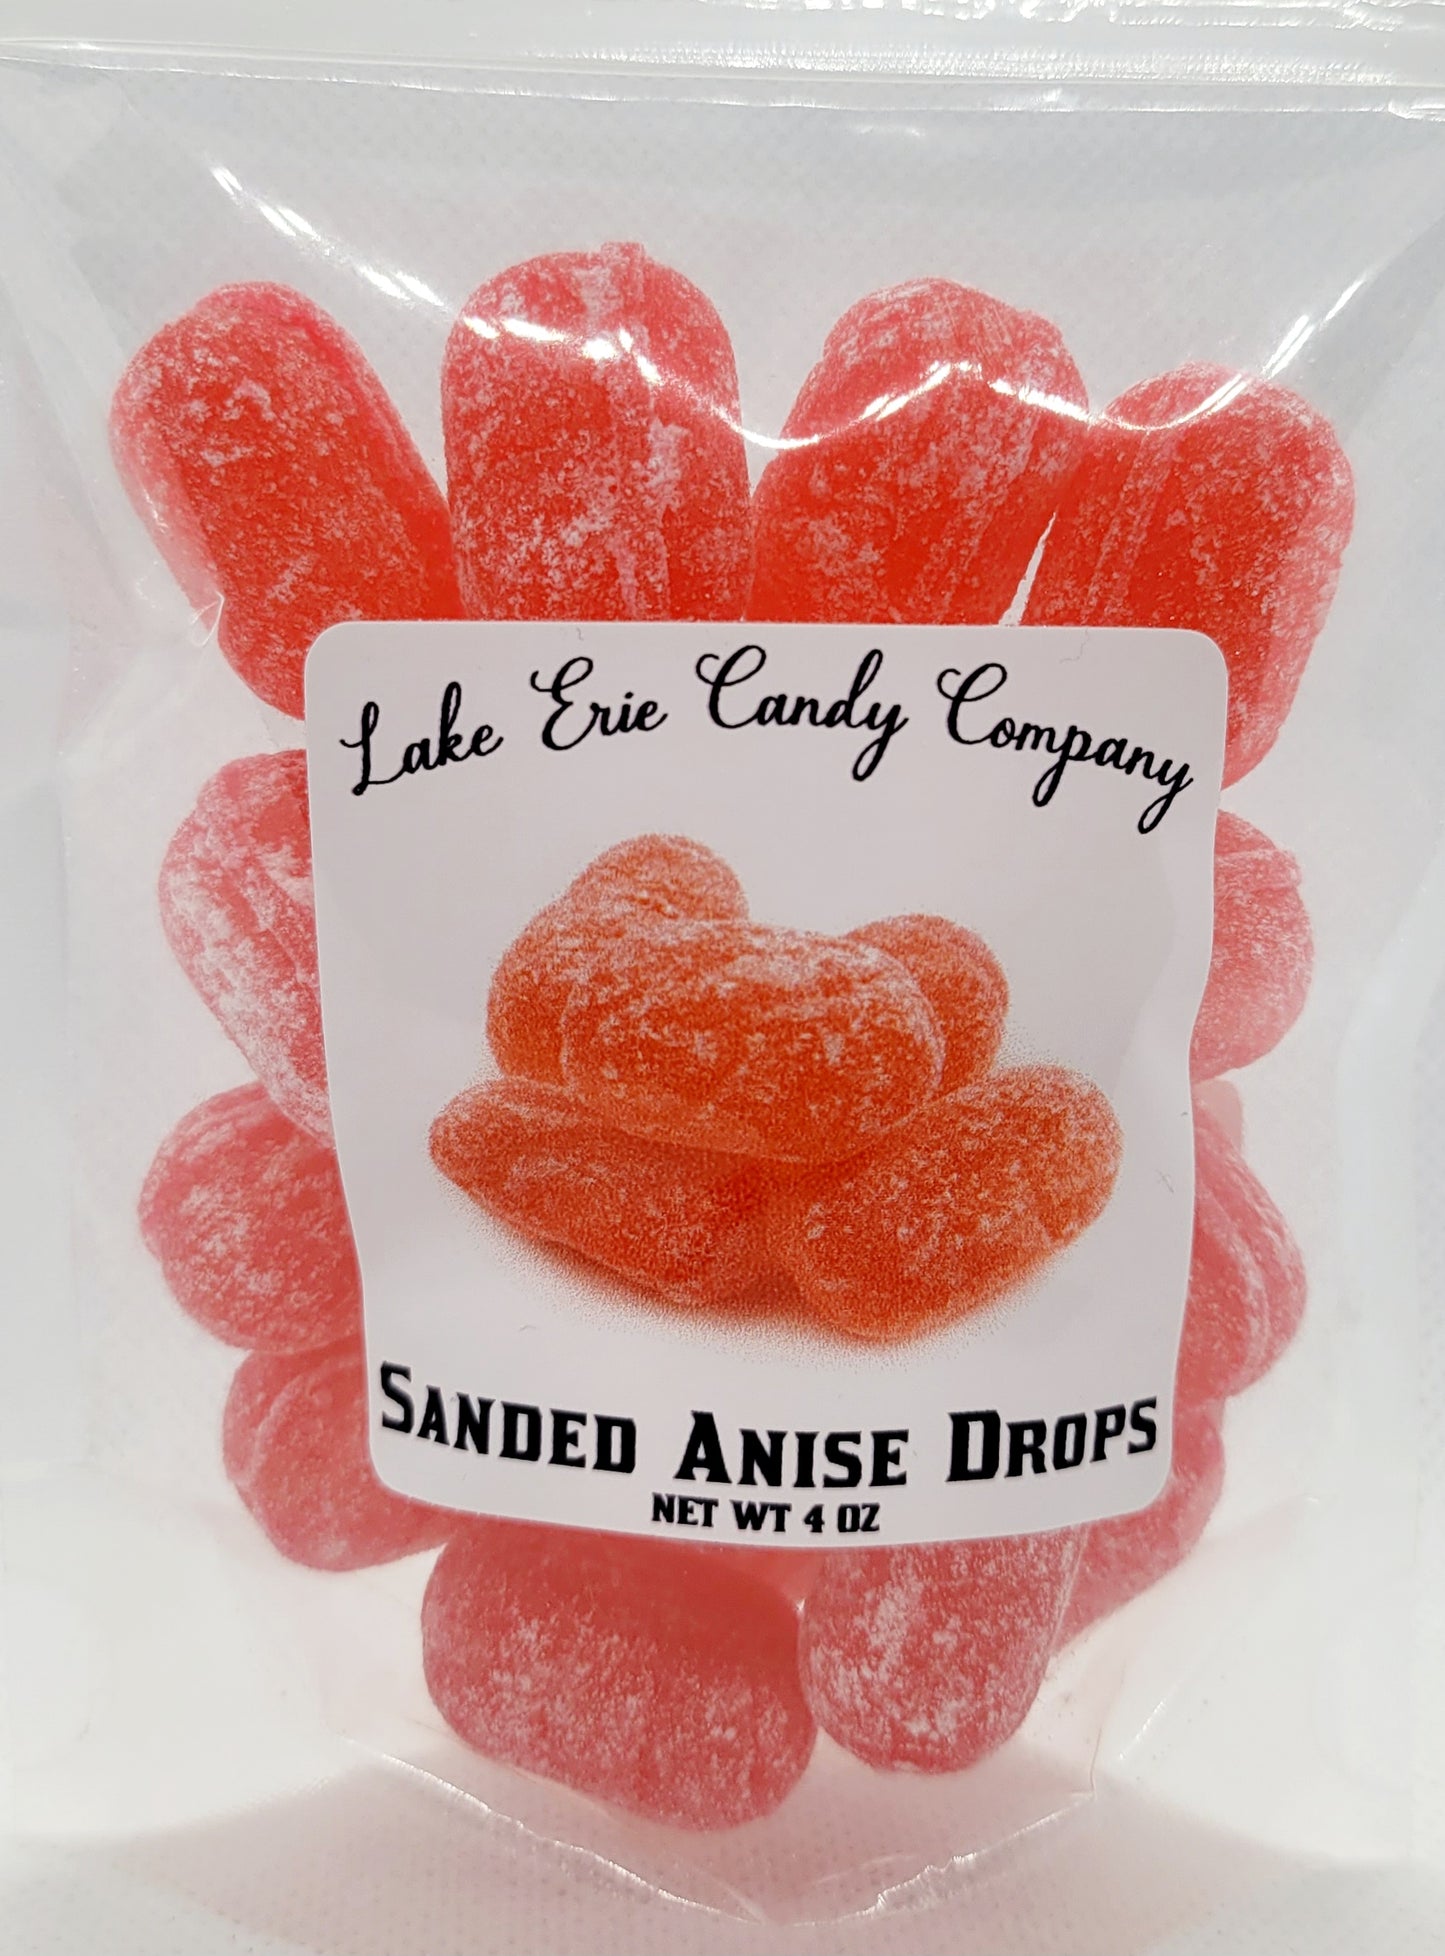 Sanded Anise Drops